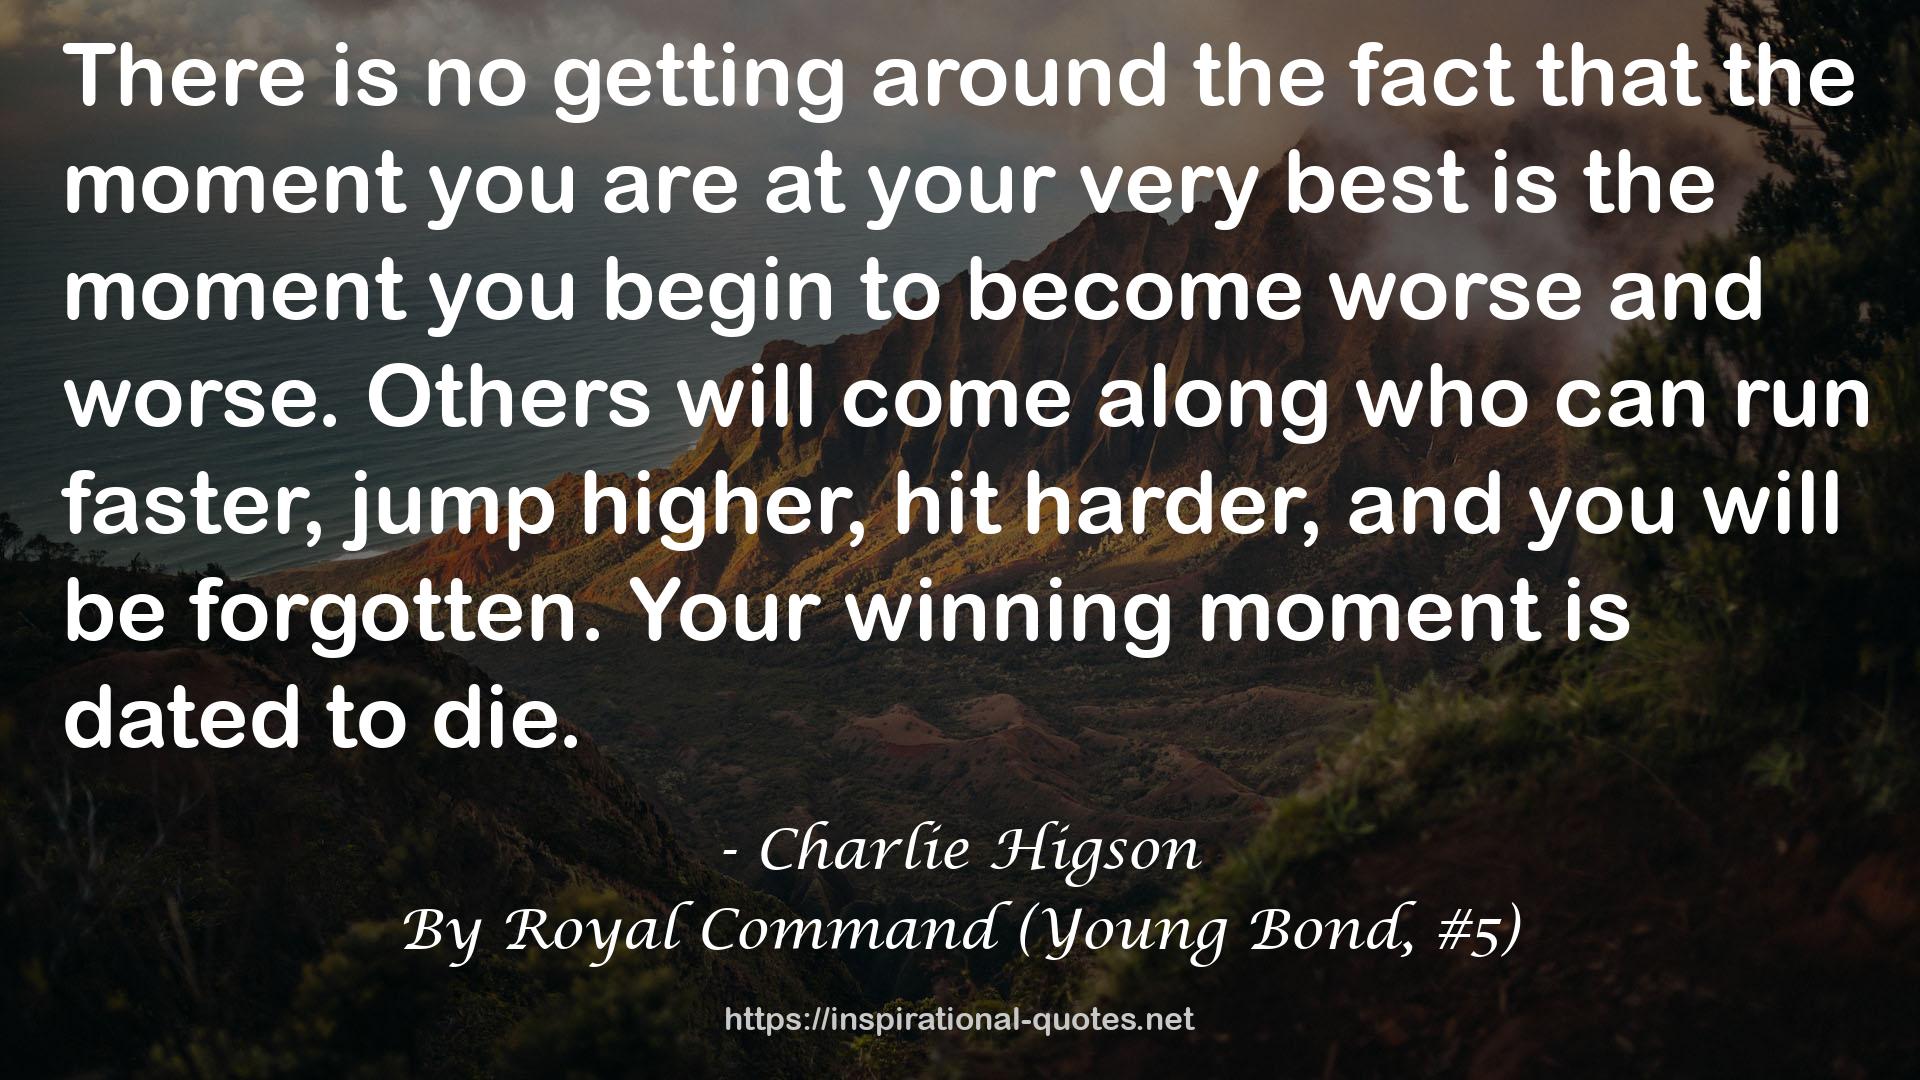 By Royal Command (Young Bond, #5) QUOTES